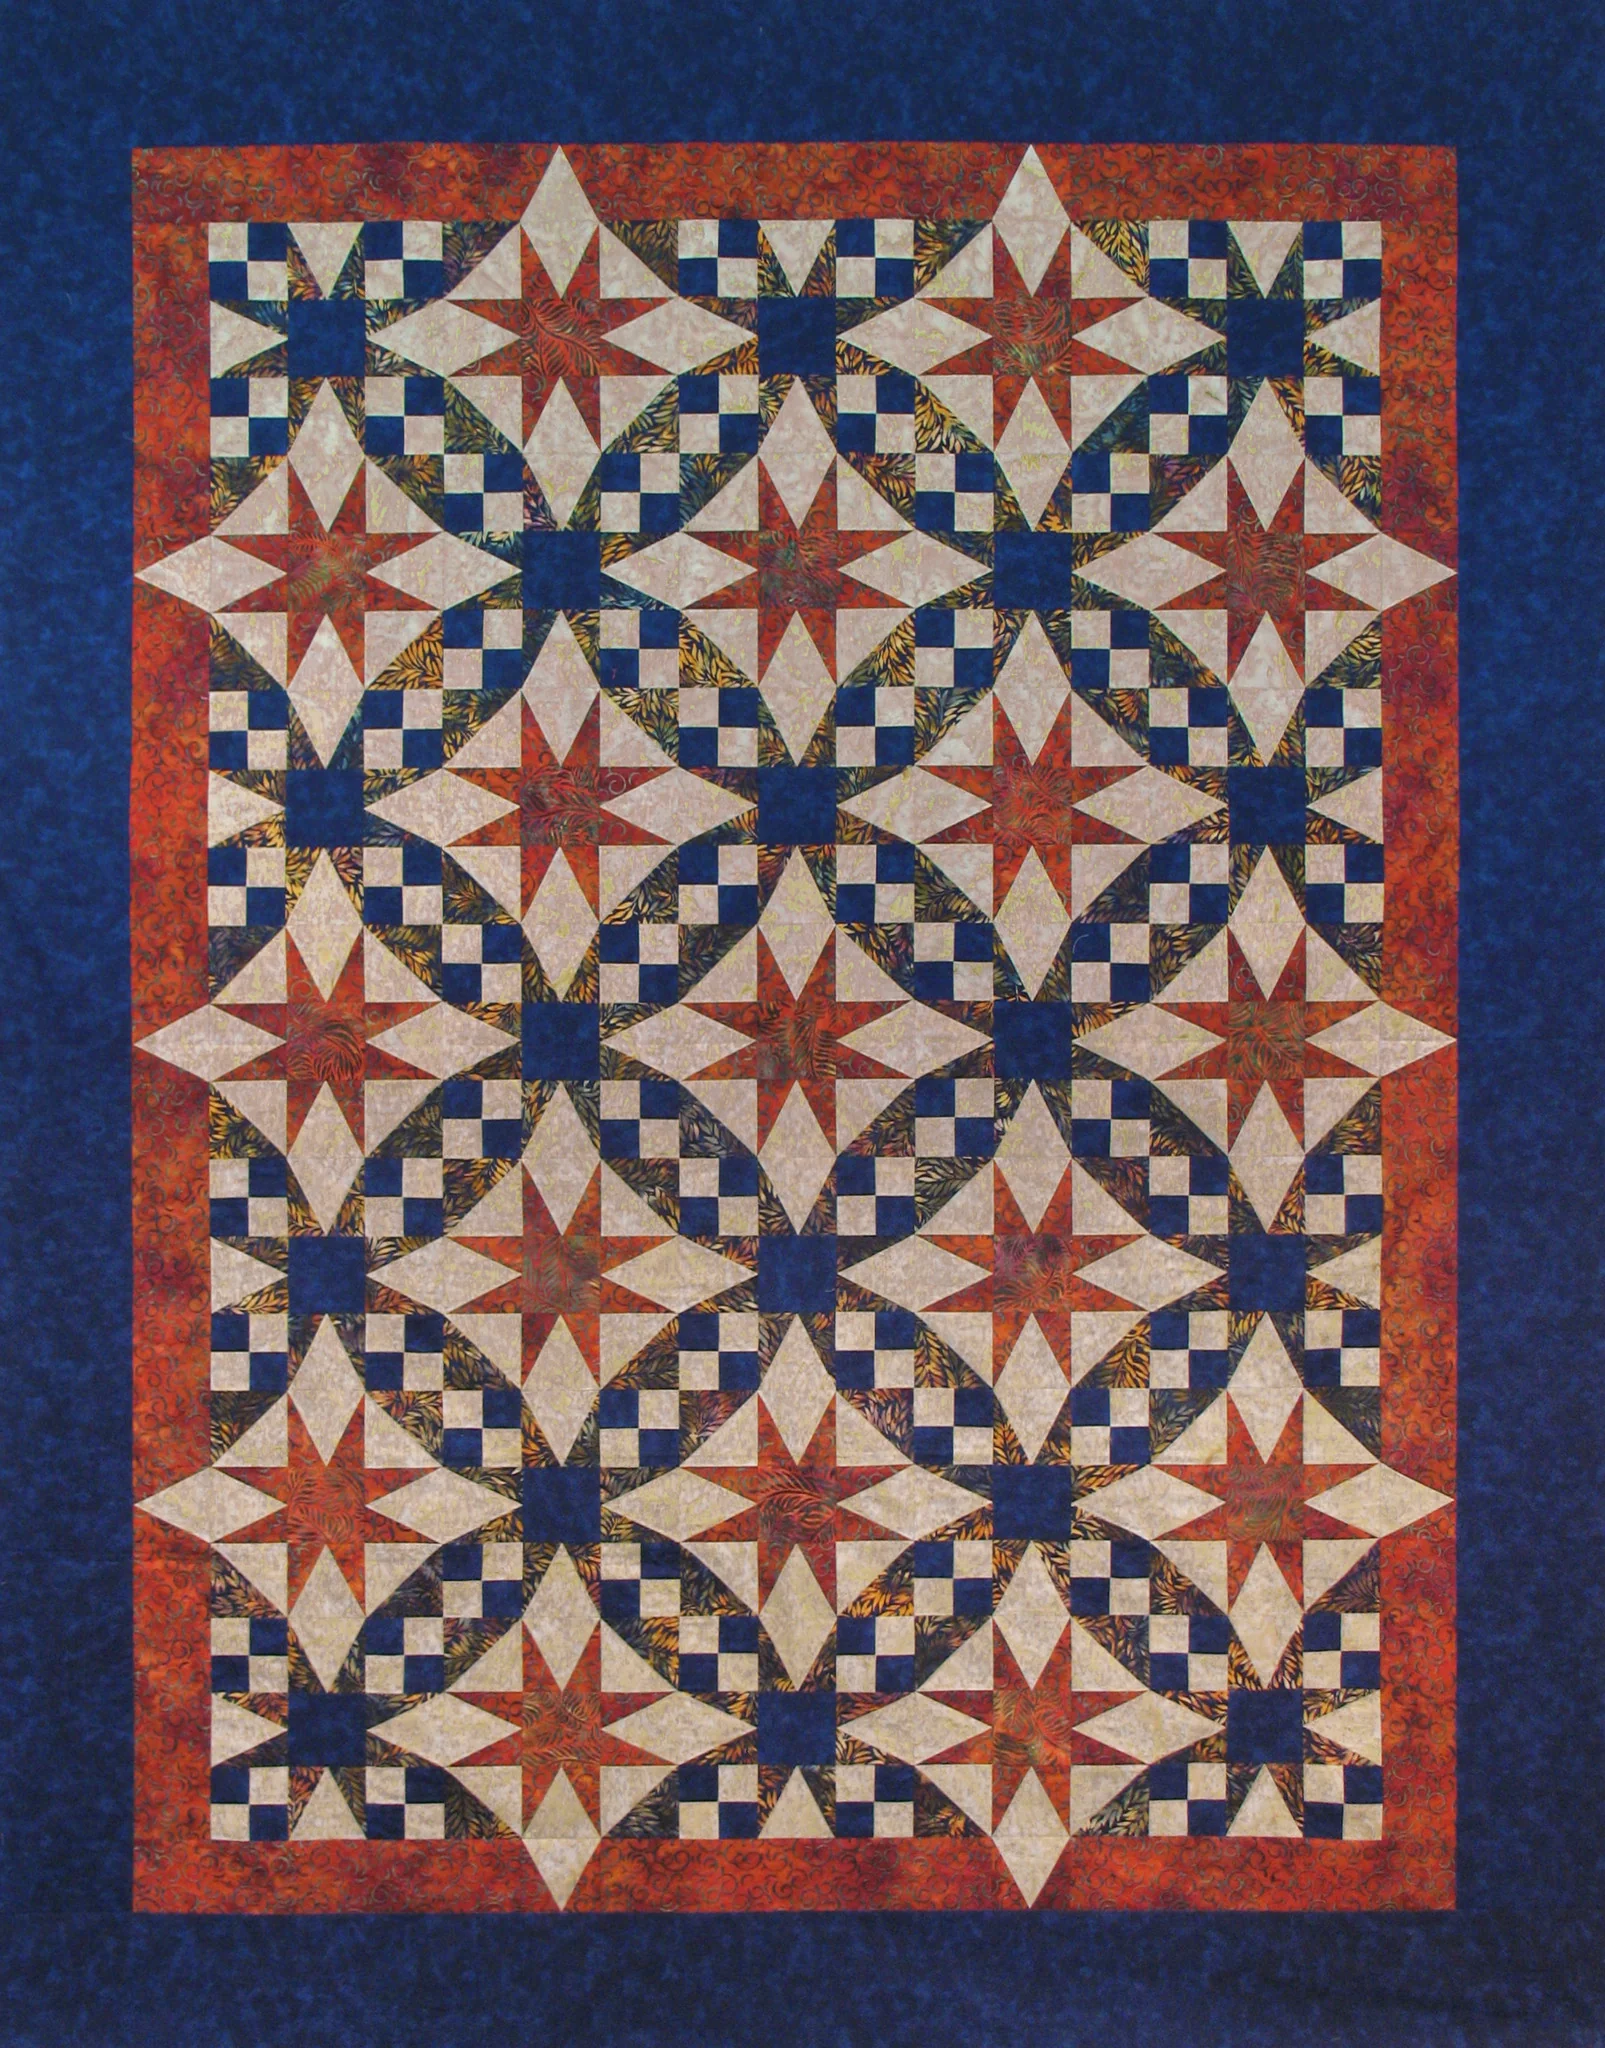 Studio 180 Design Galaxy Quilting Pattern DTP045 for Sale at World Weidner